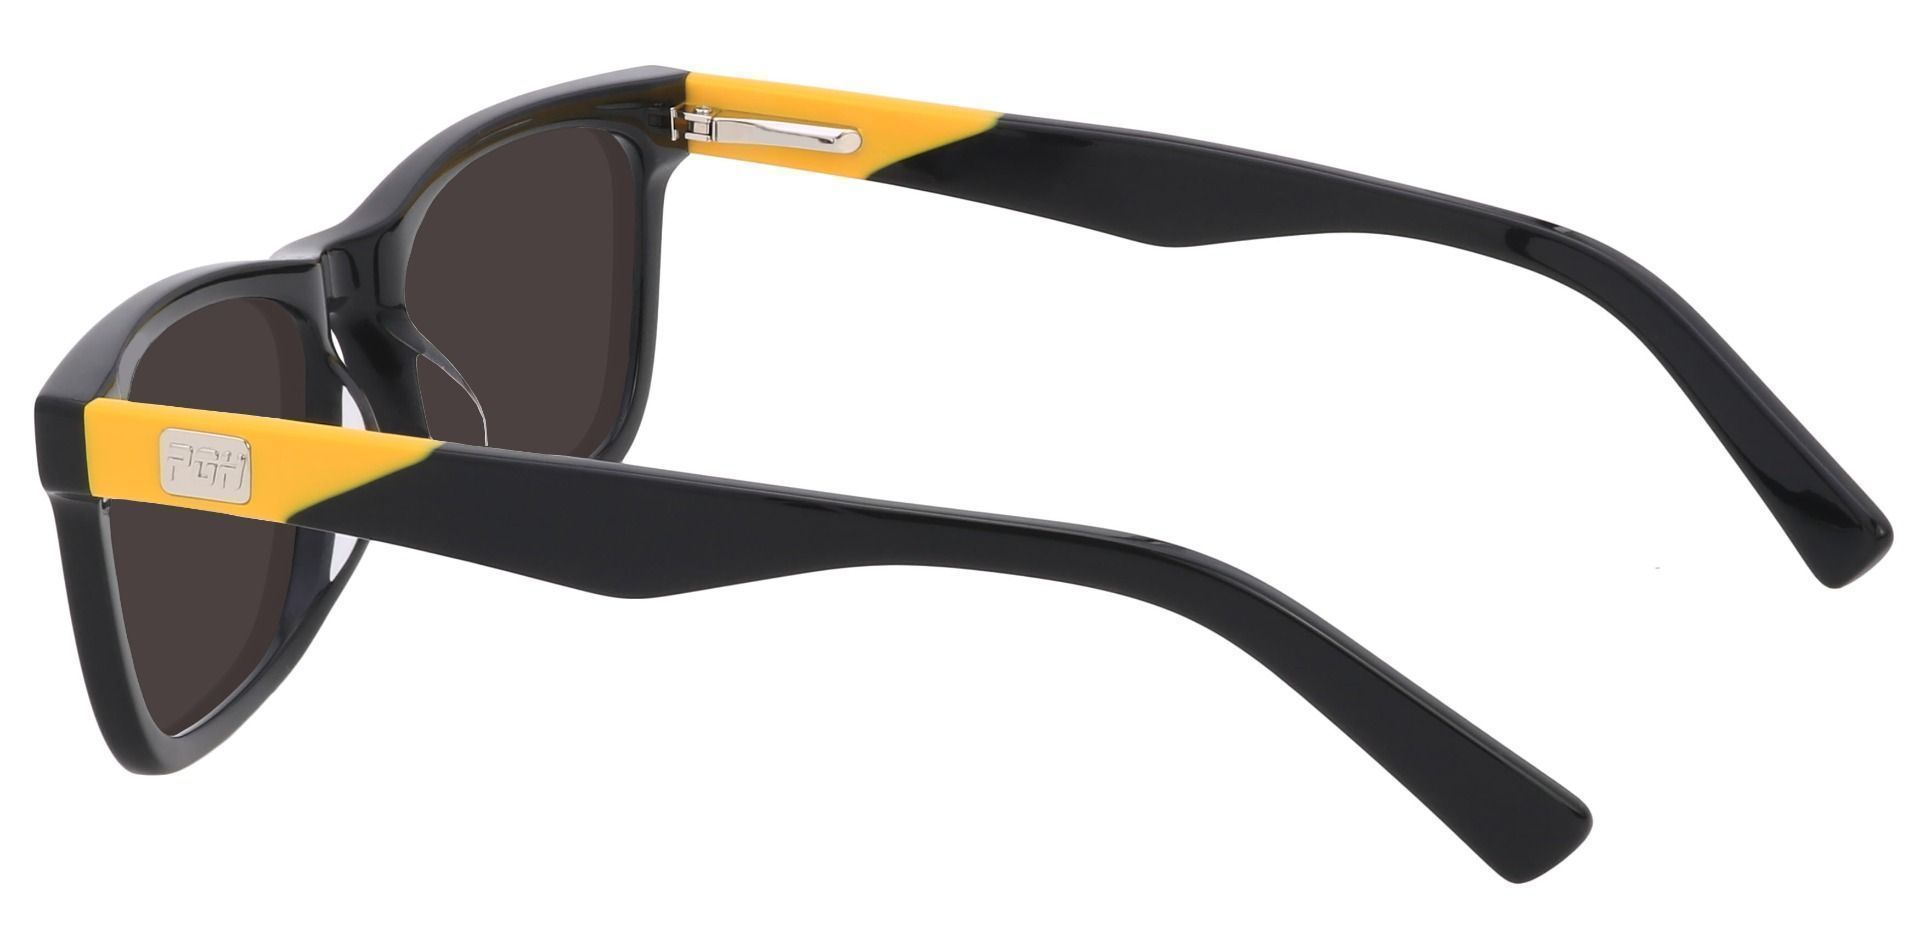 Liberty Rectangle Non-Rx Sunglasses - Black Frame With Gray Lenses